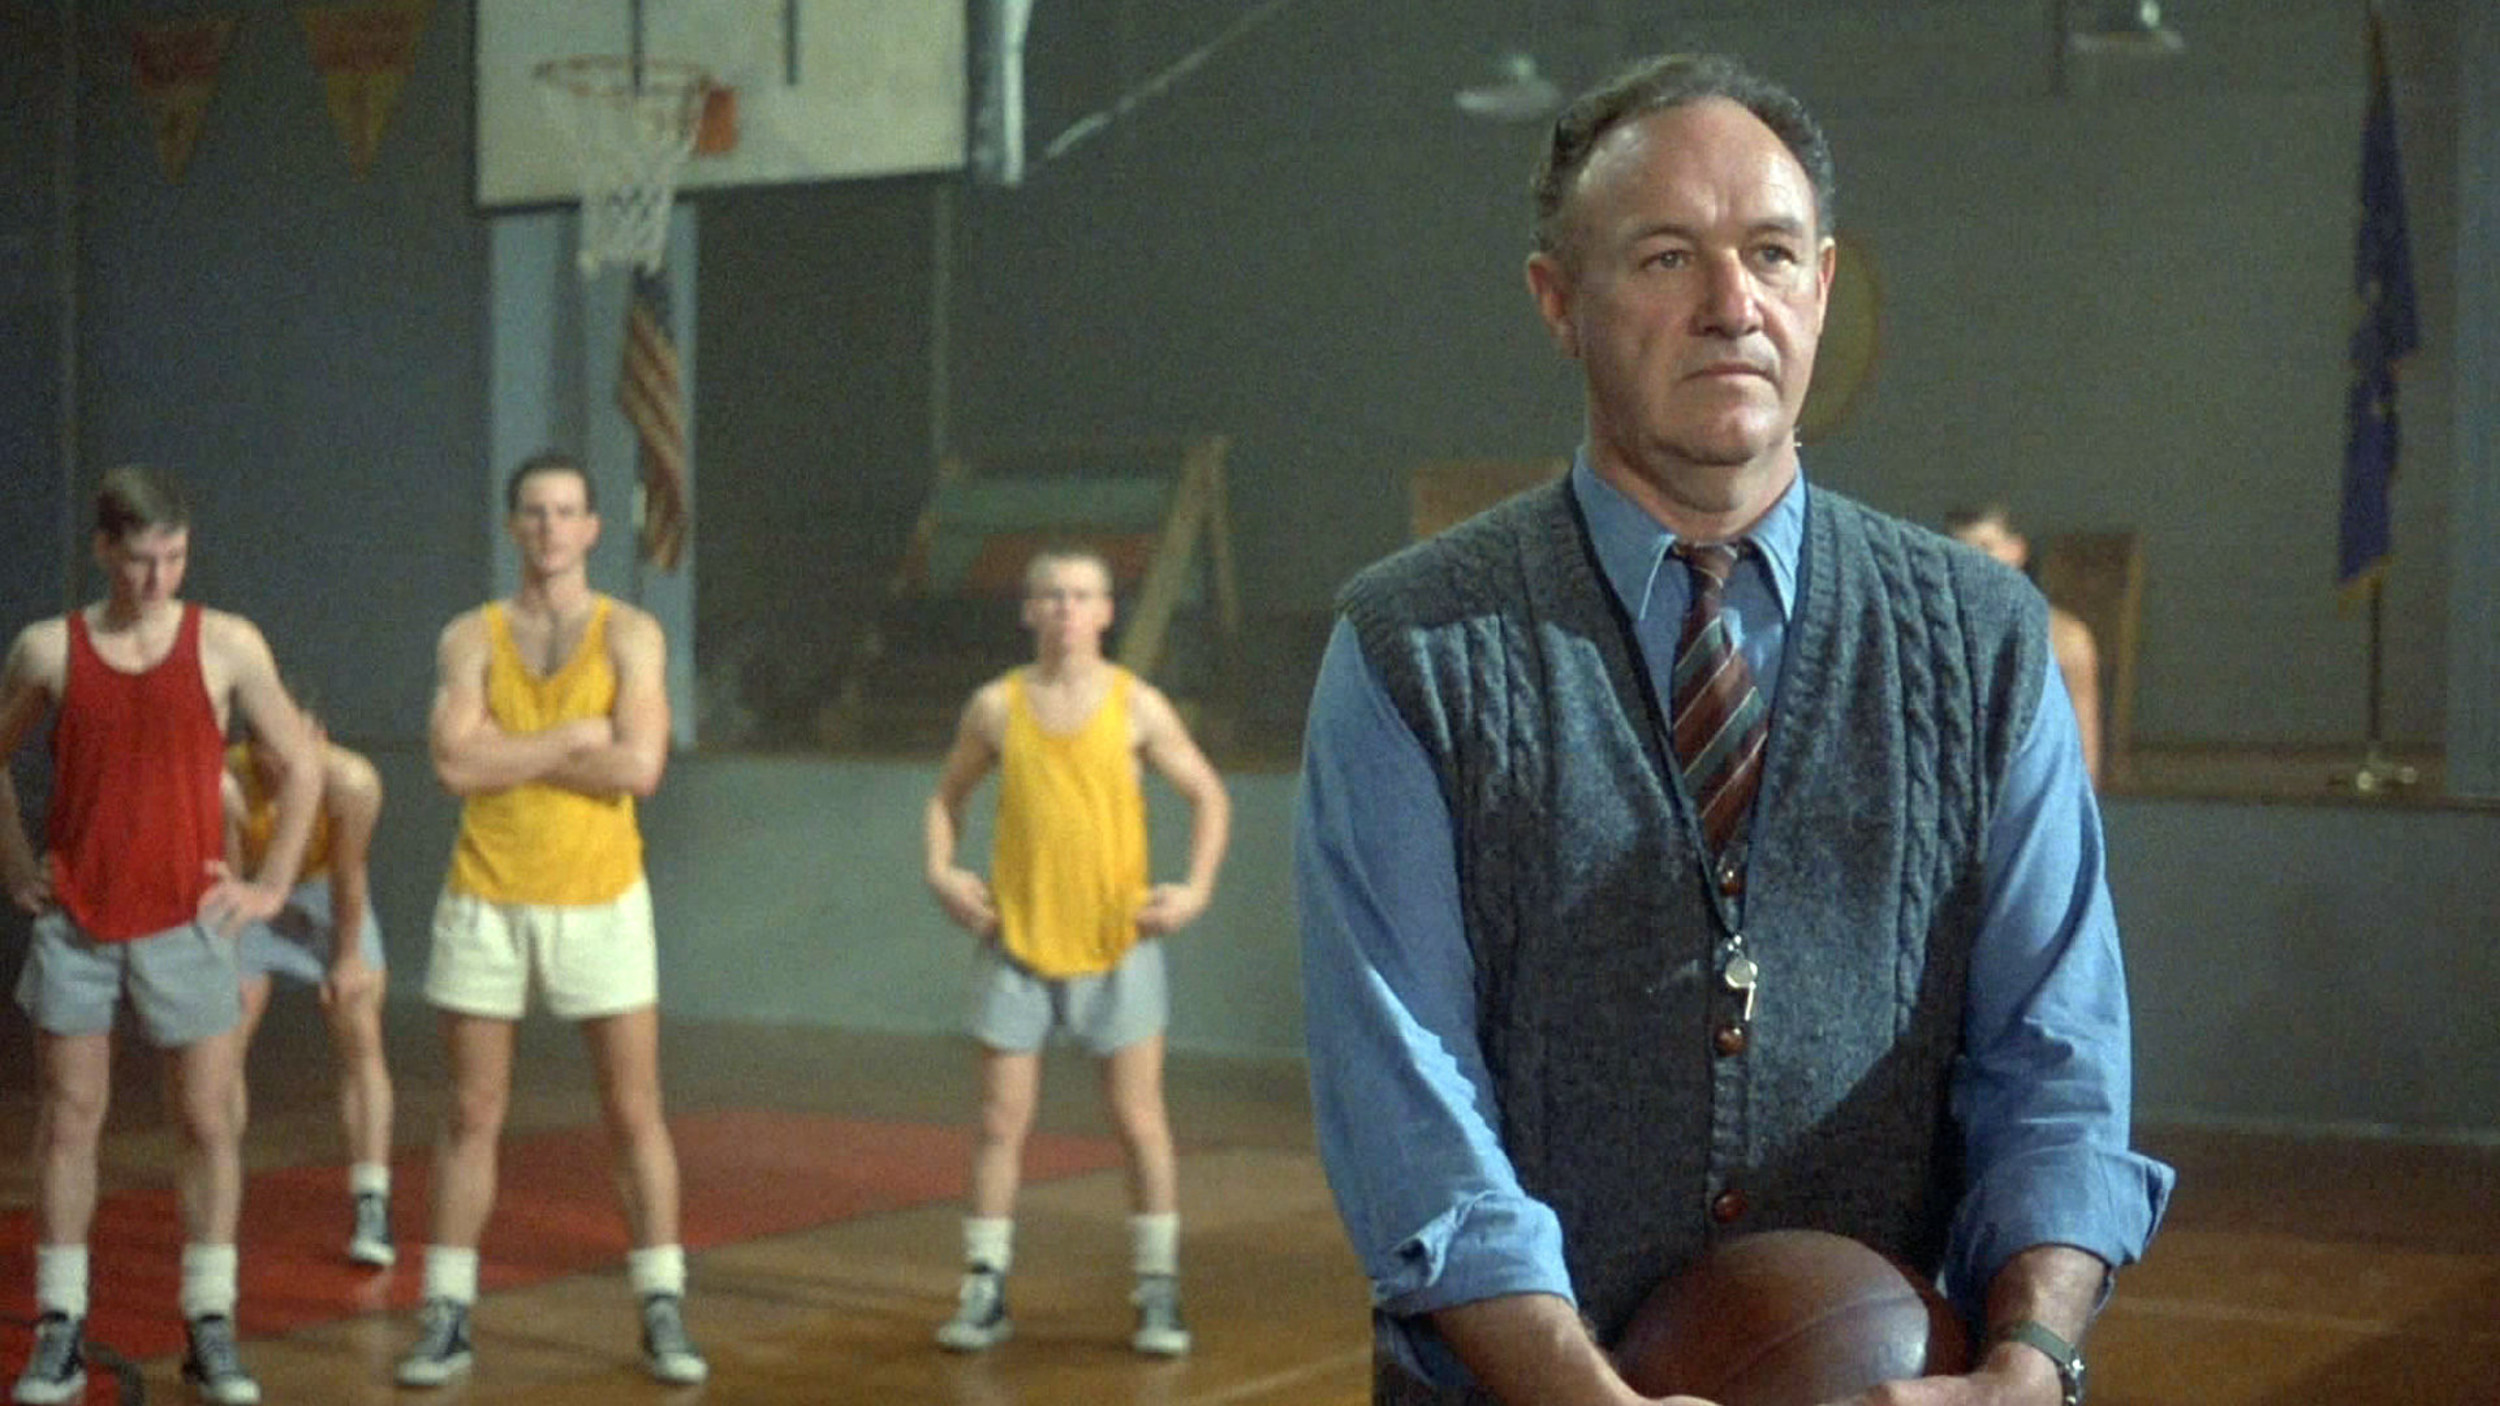 <p>Here’s a sports movie that focuses a bit more on the coaches than the players. However, when those coaches are played by Gene Hackman and Dennis Hopper, you get why they did that. You will see Hackman again later on this list, because nobody could play a grizzled coach like him. Heck, he was great at playing a grizzled anything. The basketball scenes are solid too.</p><p>You may also like: <a href='https://www.yardbarker.com/mlb/articles/the_24_best_players_in_milwaukee_brewers_history/s1__38897628'>The 24 best players in Milwaukee Brewers history</a></p>